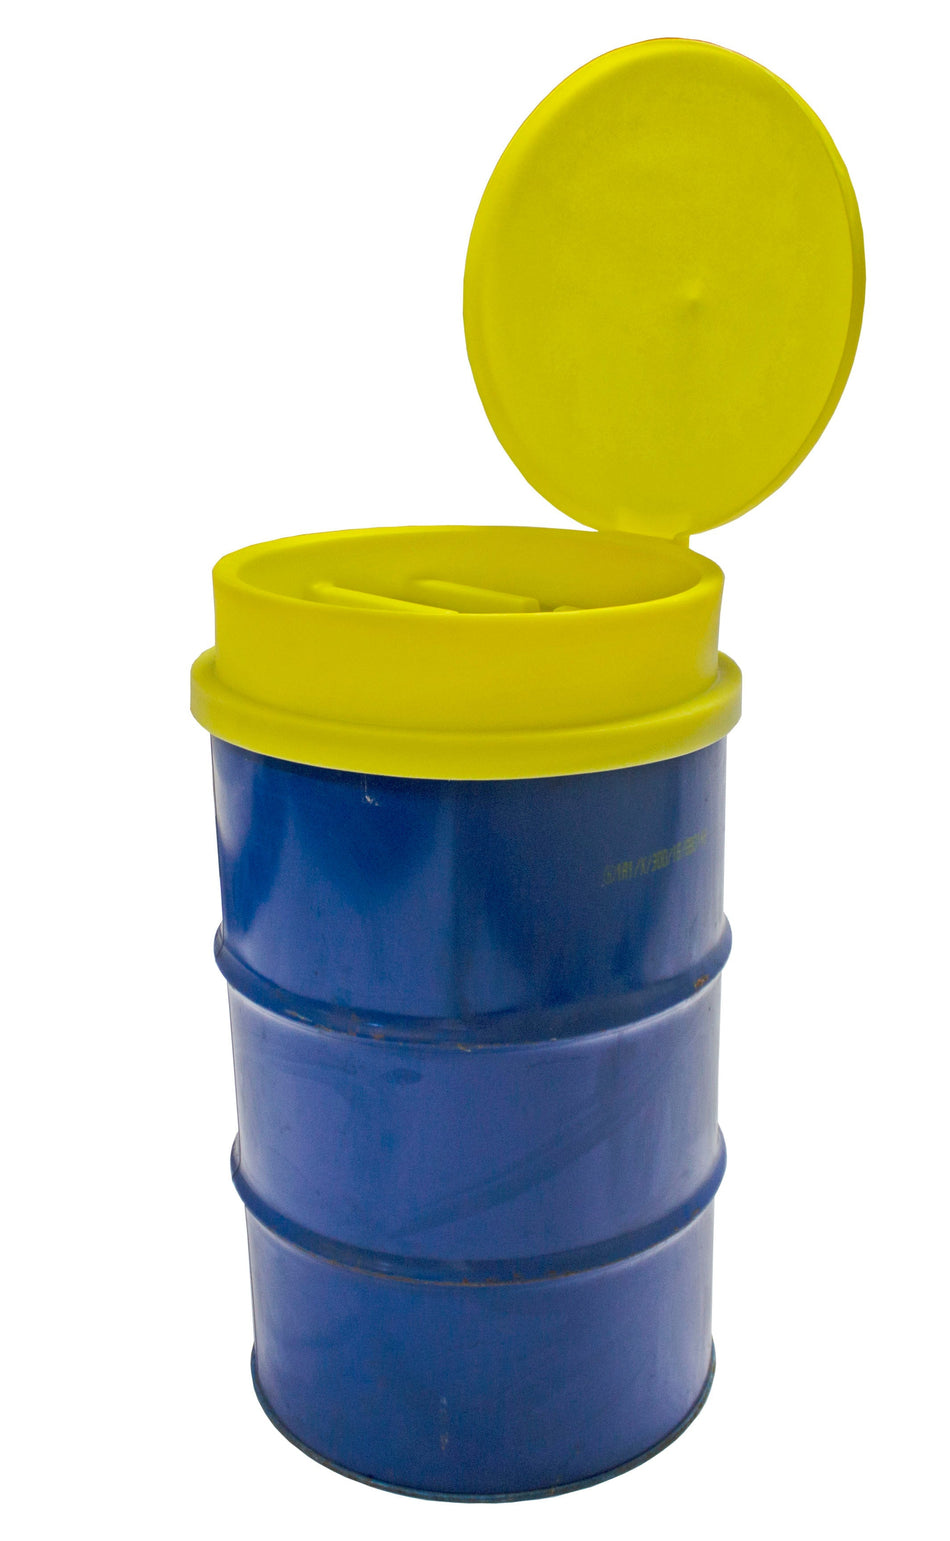 DF1 Drum Funnel for Open or Closed 205 Litre Head Drums Spill Pallet > Drum Storage > Spill Containment > Spill Control > Romold > One Stop For Safety   